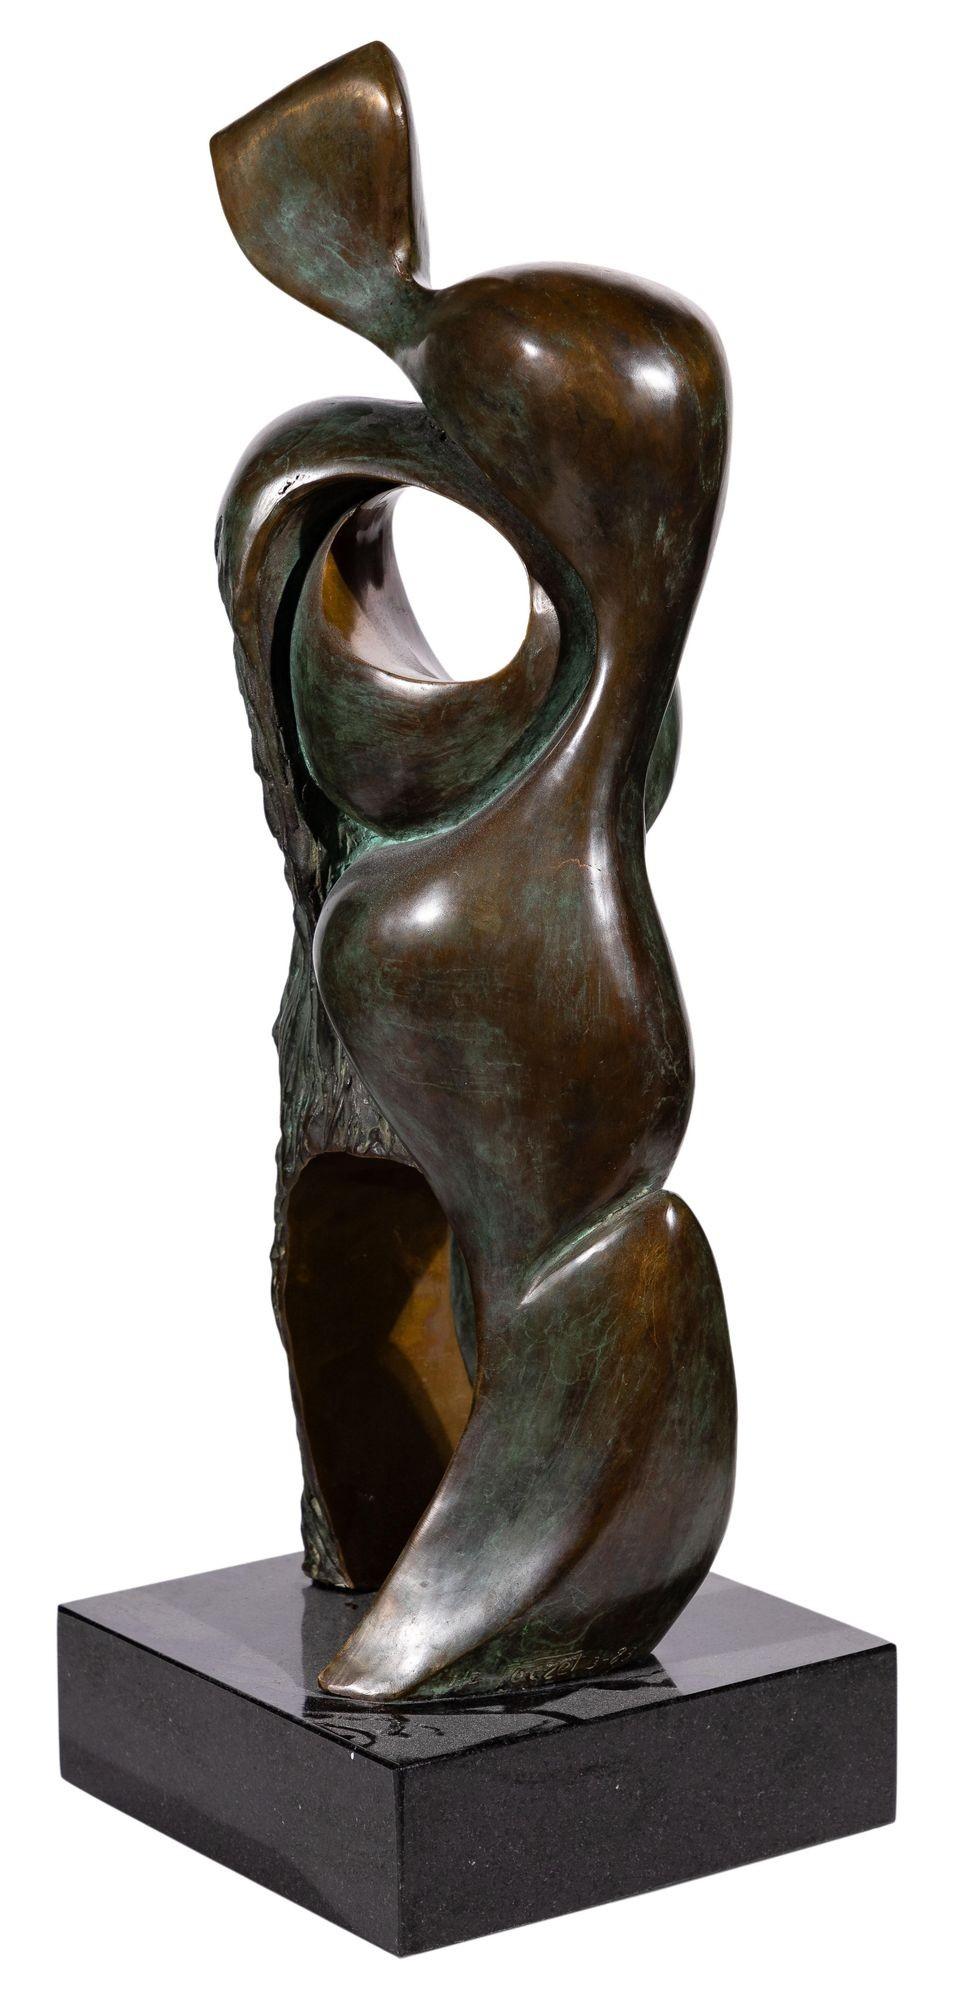 Fascinating bronze sculpture standing on a black marble base by Jean Jacques Porret depicting an abstract yet minimalist figure. *Signed and dated (1983).
Dimensions:
28